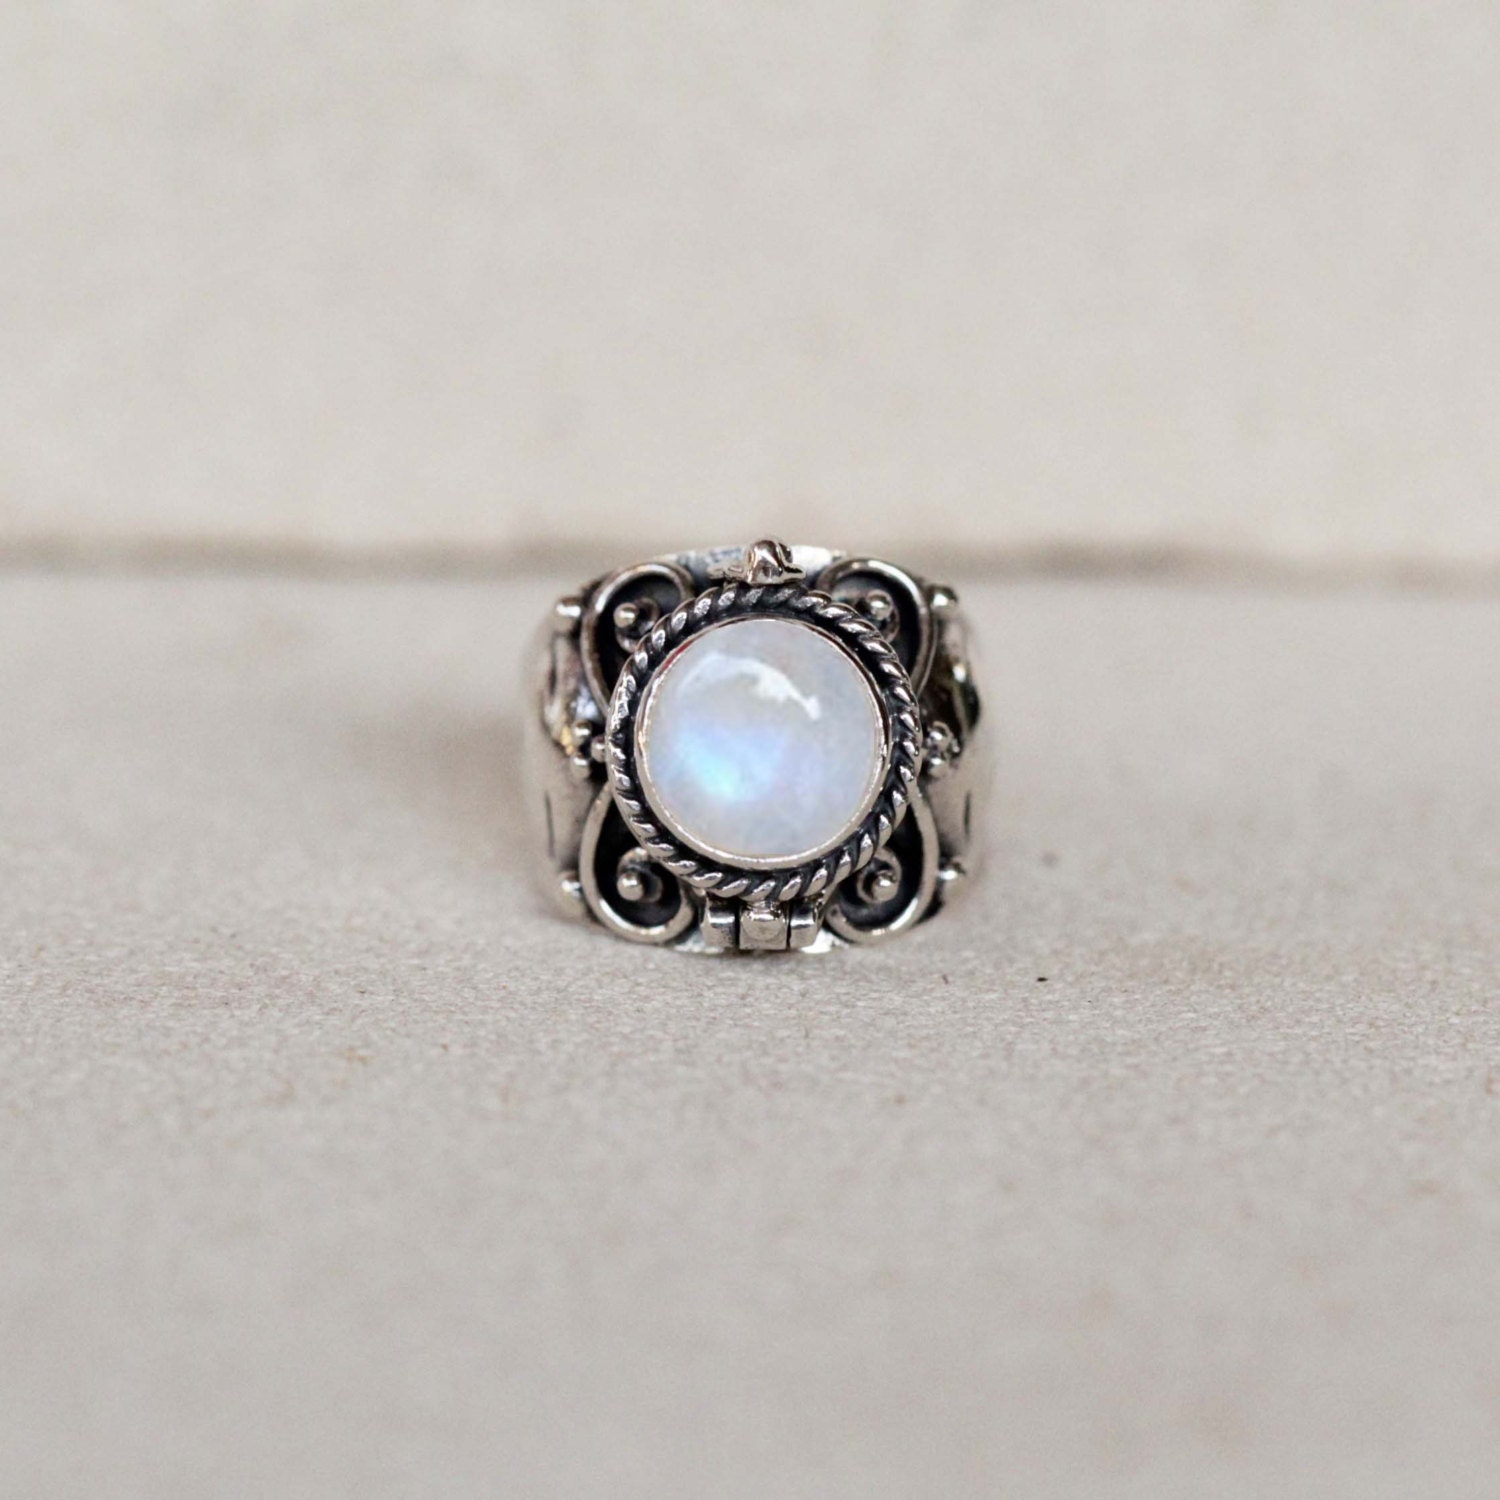 Moonstone Locket Ring Secret Compartment Ring by DonBiuSilver